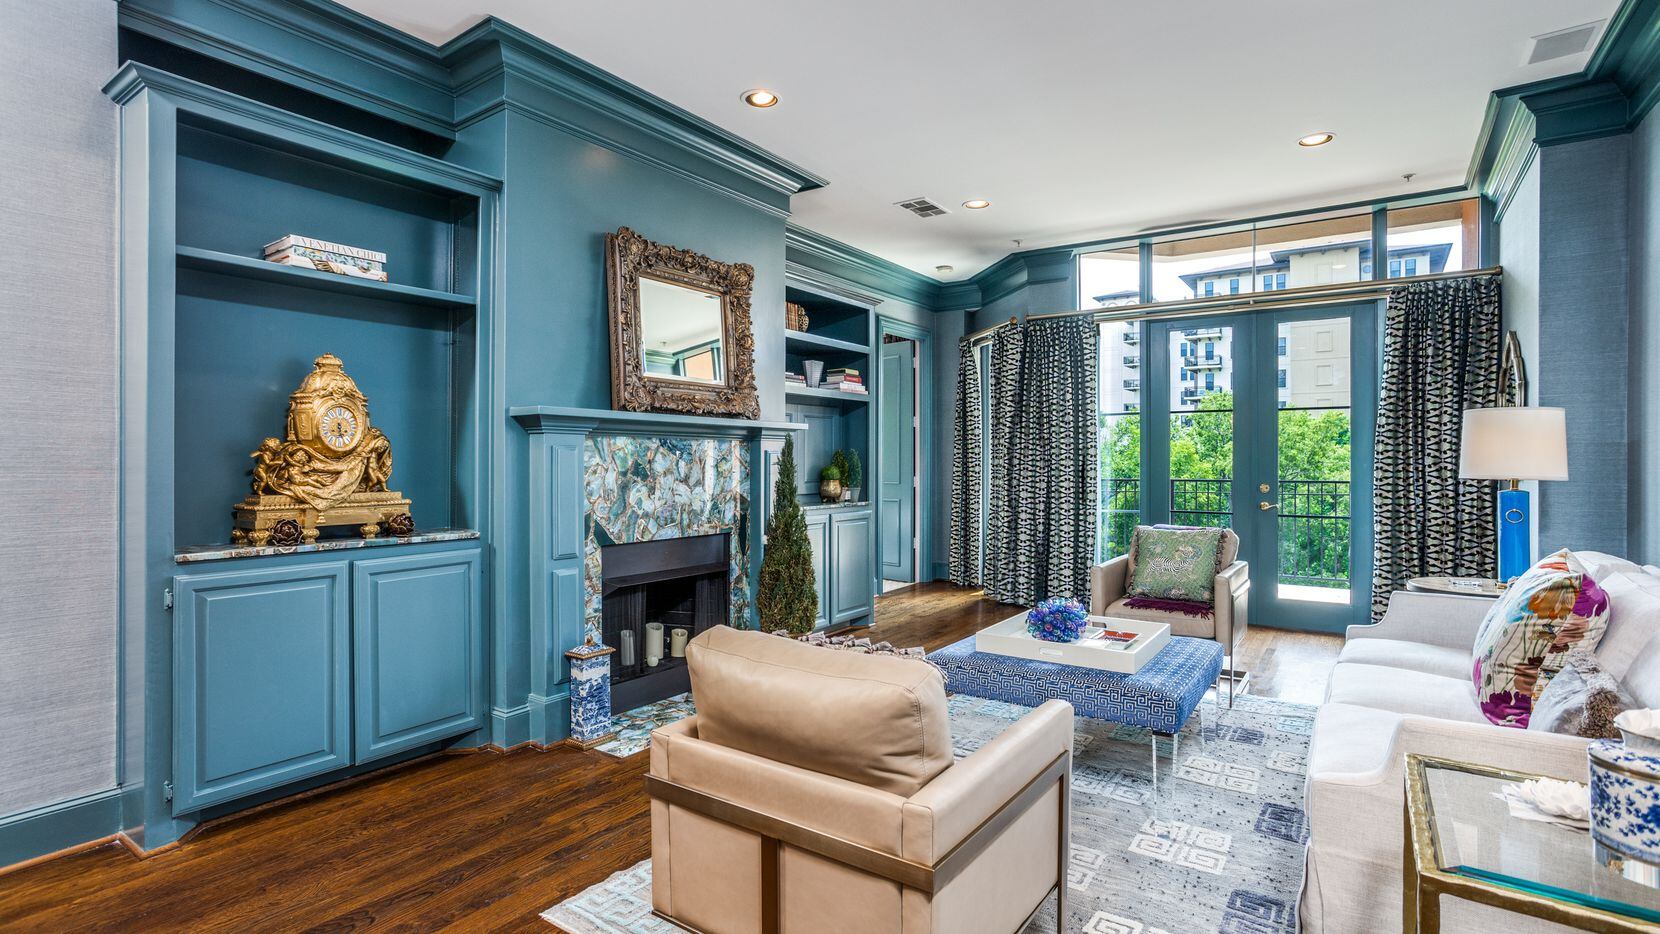 Take a look inside this colorful condo at 3535 Gillespie St. No. 306 in Dallas.